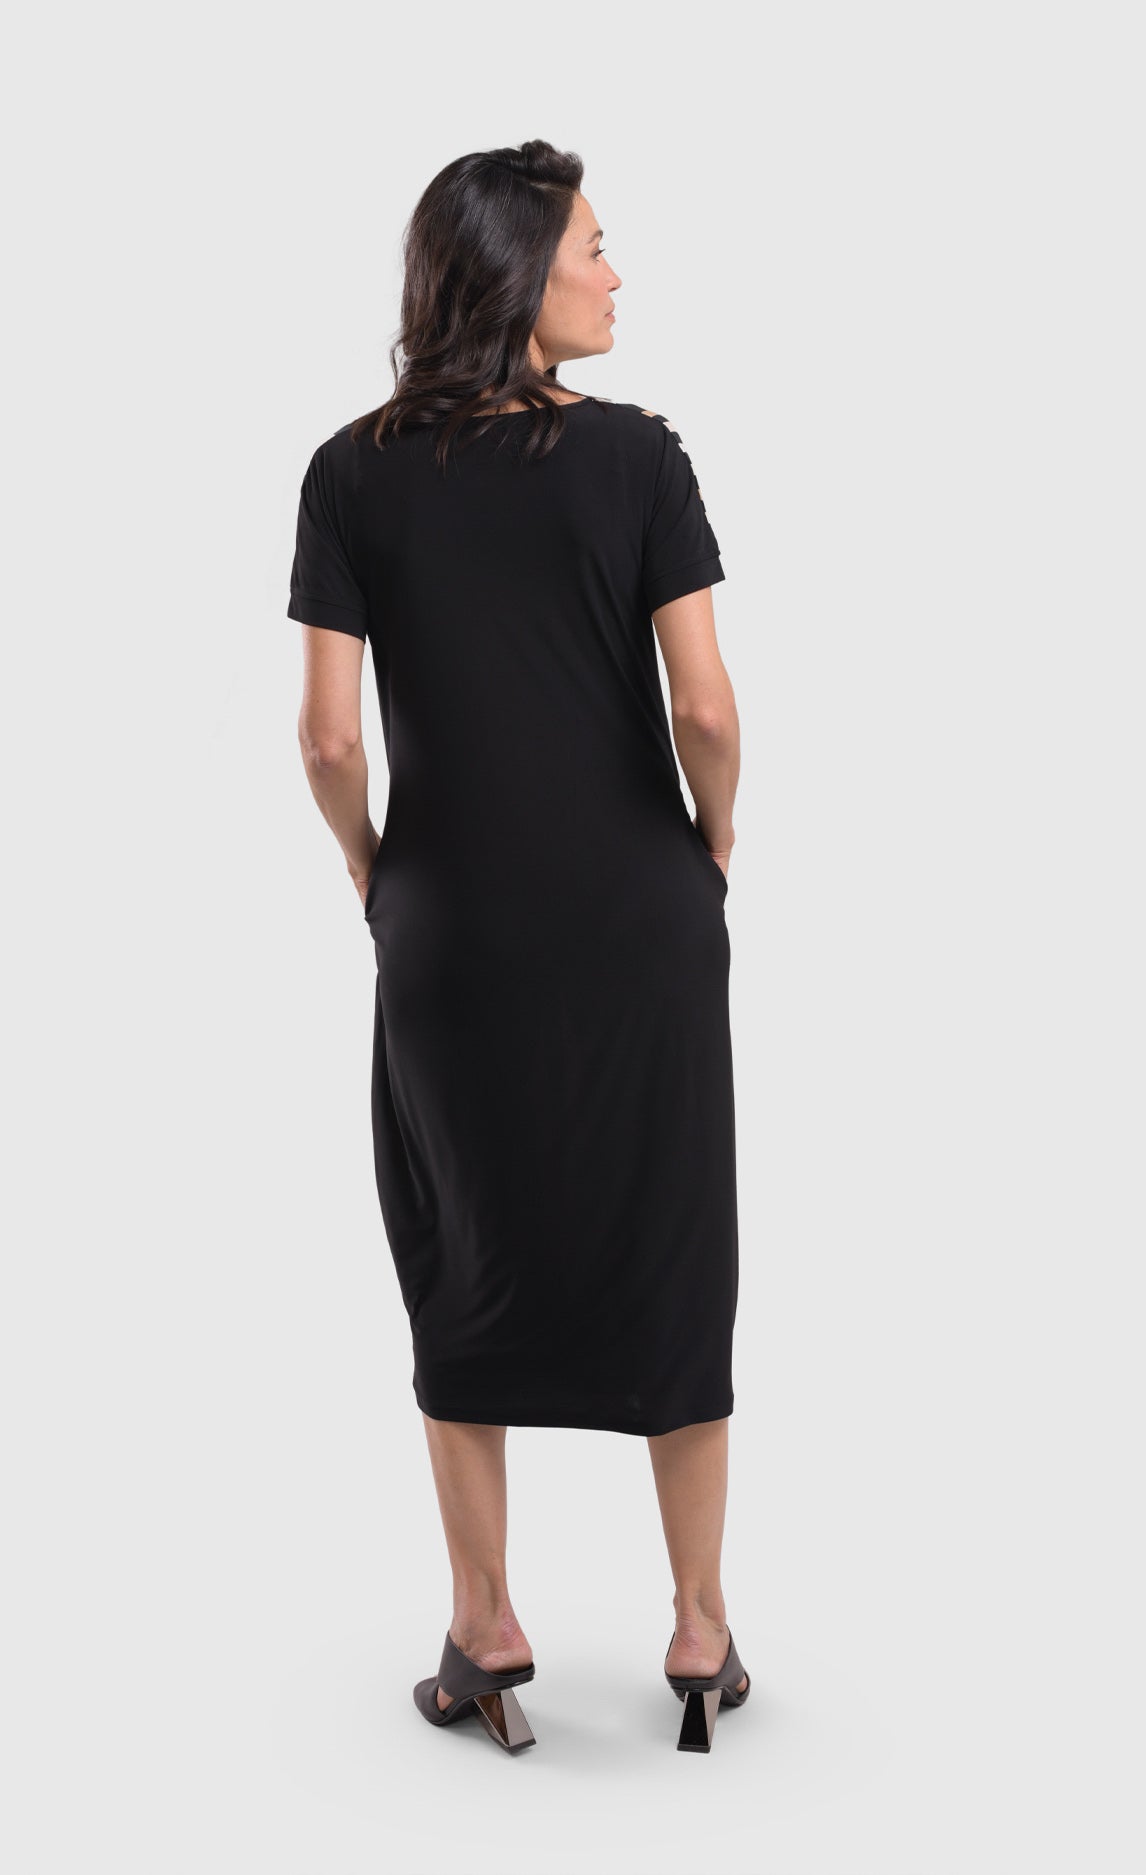 Back full body view of a woman wearing the alembika sunrise stripe dress. This dress is solid black on the back, has short sleeves, and a relaxed silhouette with a poof skirt. This dress sits mid calf level.